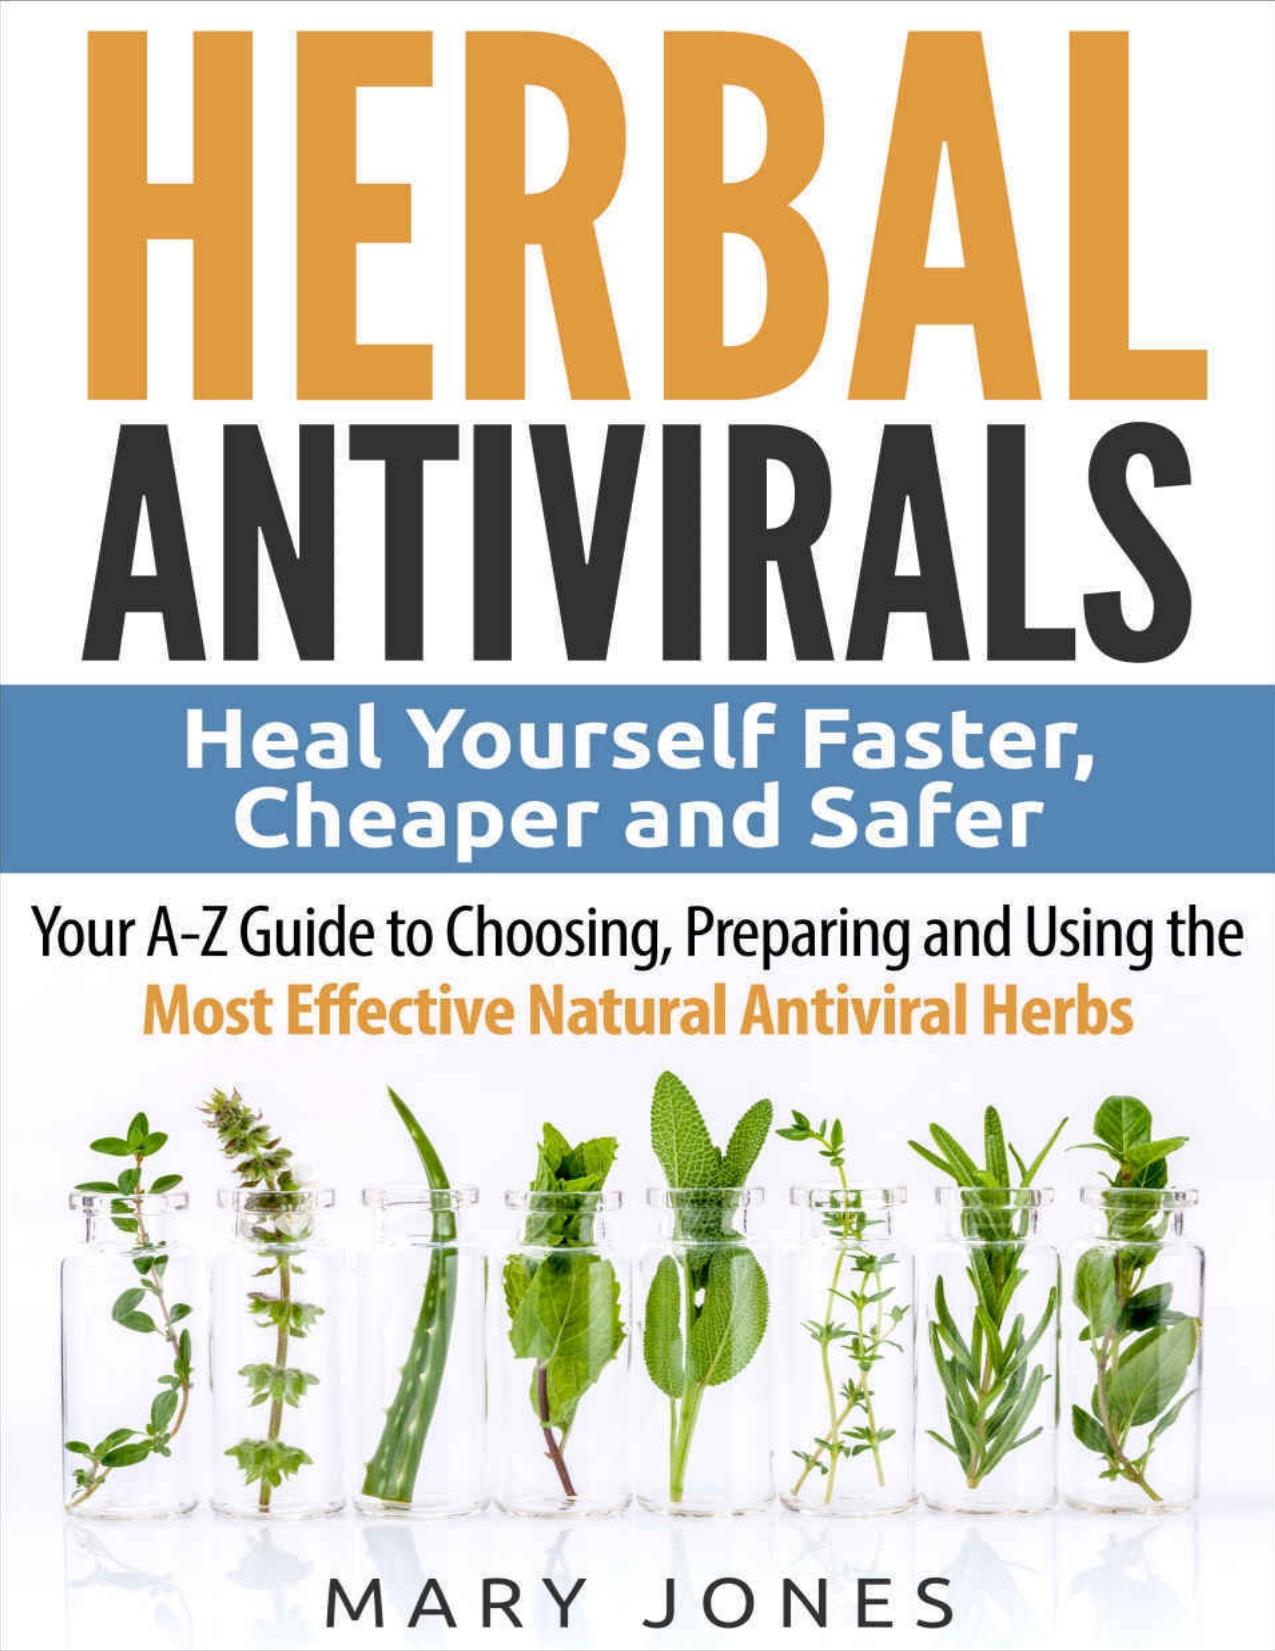 Herbal Antivirals: Heal Yourself Faster, Cheaper and Safer - Your A-Z Guide to Choosing, Preparing and Using the Most Effective Natural Antiviral Herbs - PDFDrive.com